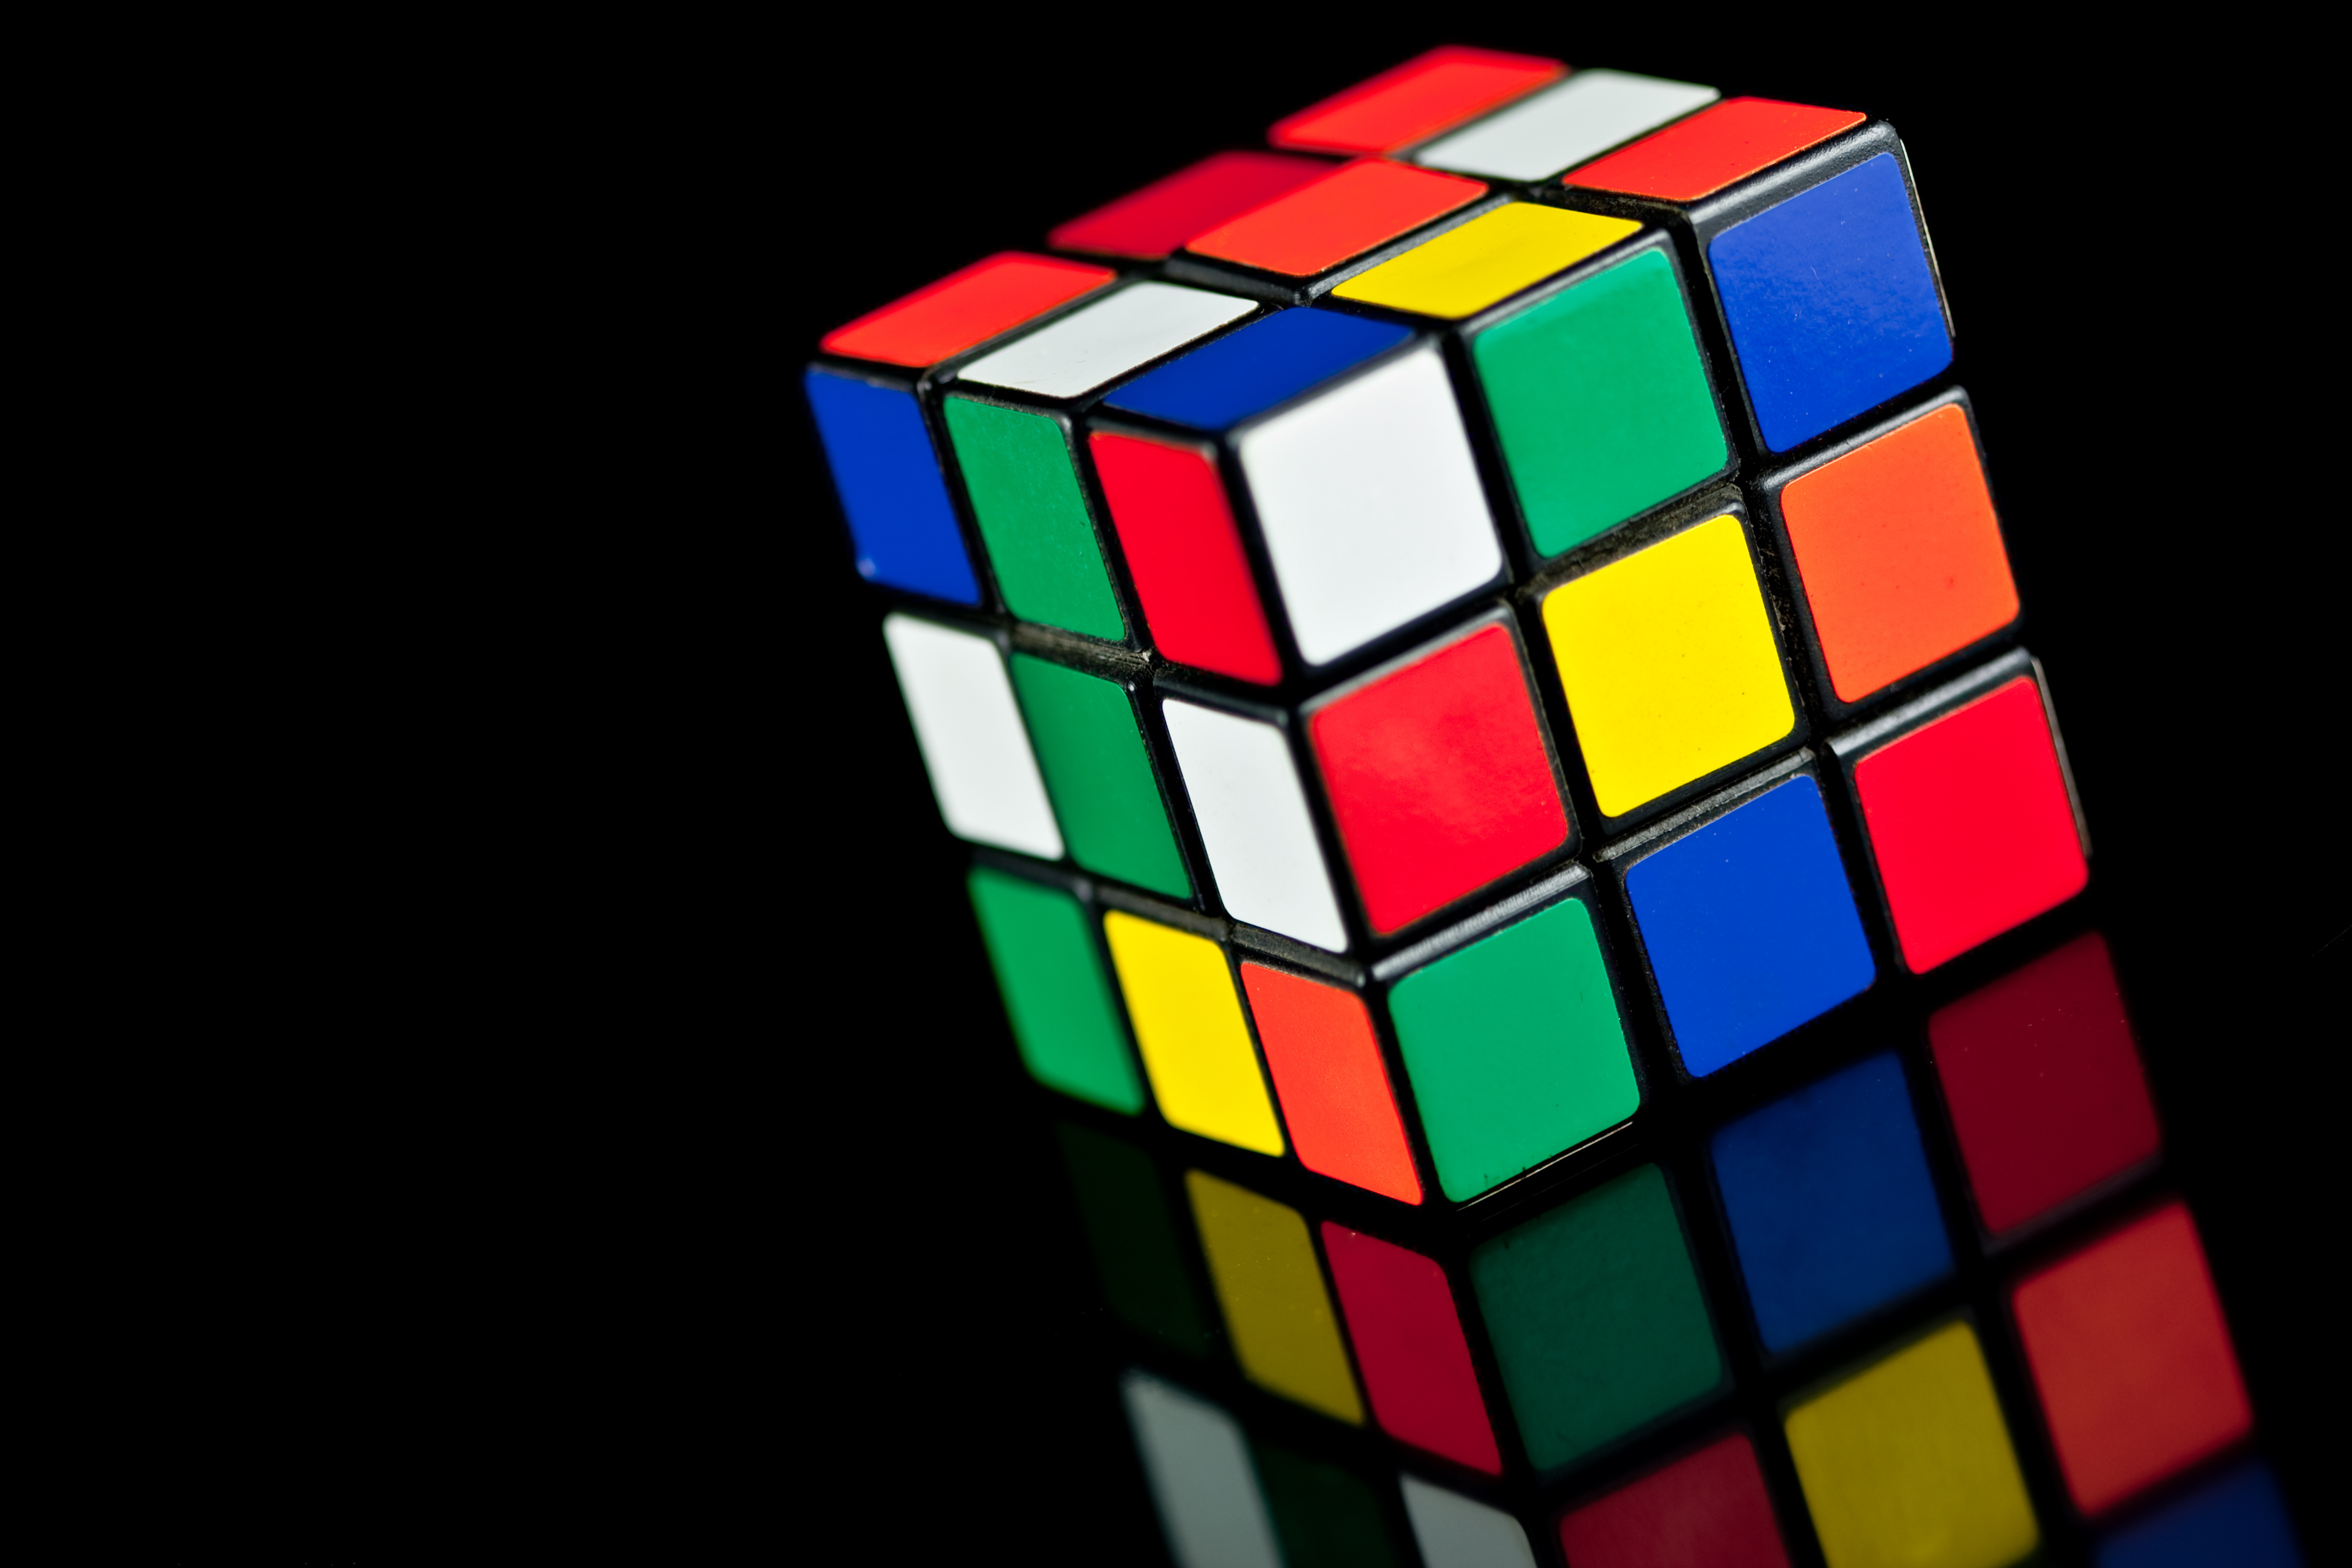 Unbelievable Video of World's Largest Rubik's Cube Goes Viral Online